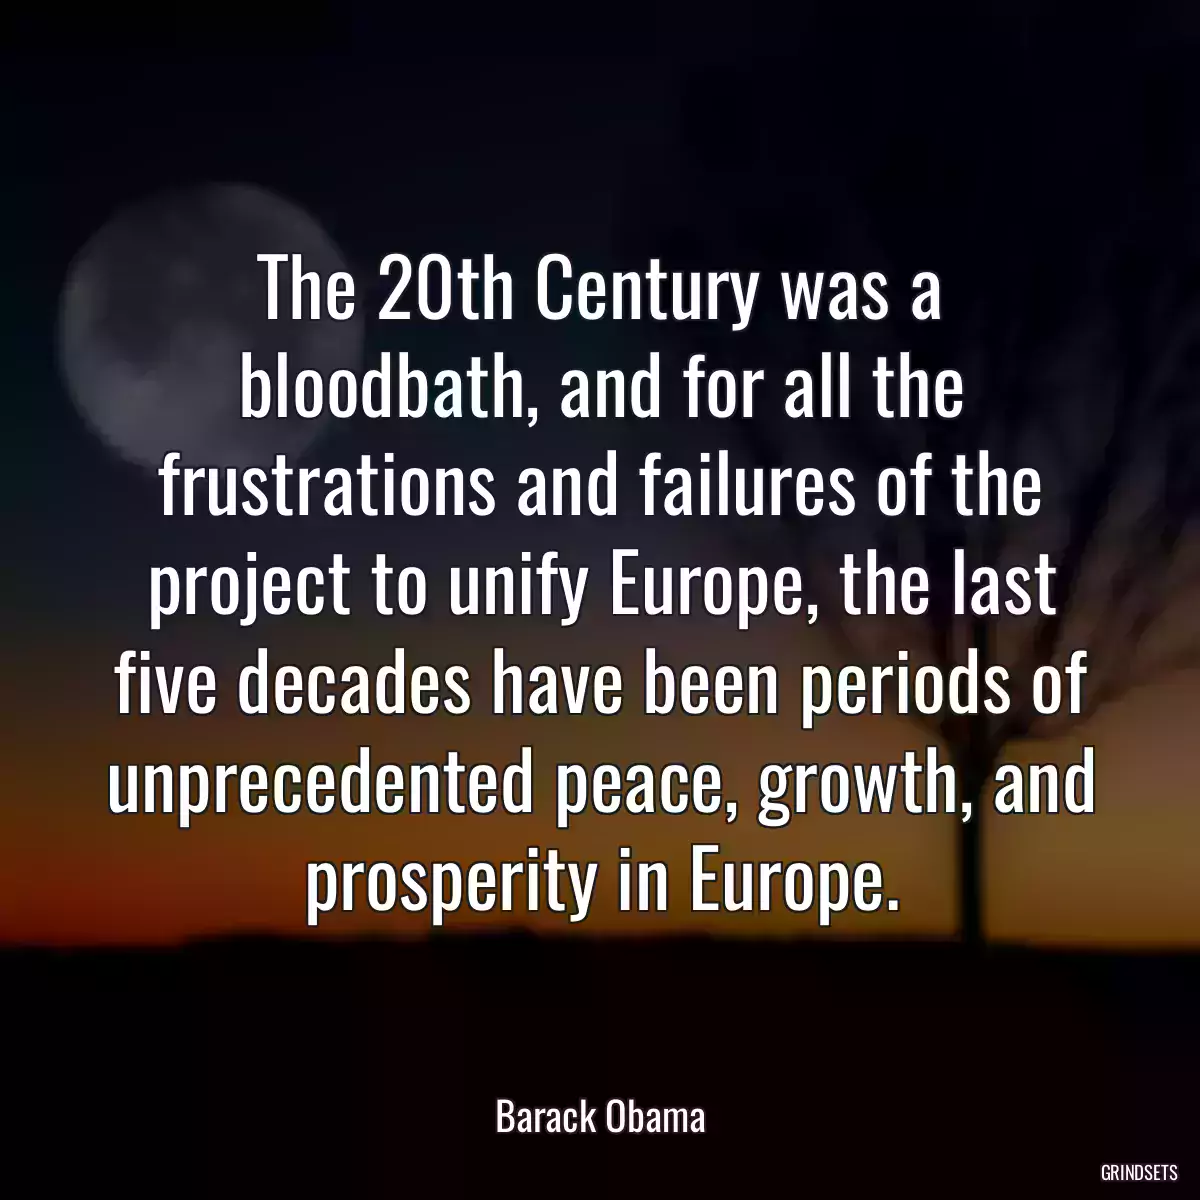 The 20th Century was a bloodbath, and for all the frustrations and failures of the project to unify Europe, the last five decades have been periods of unprecedented peace, growth, and prosperity in Europe.